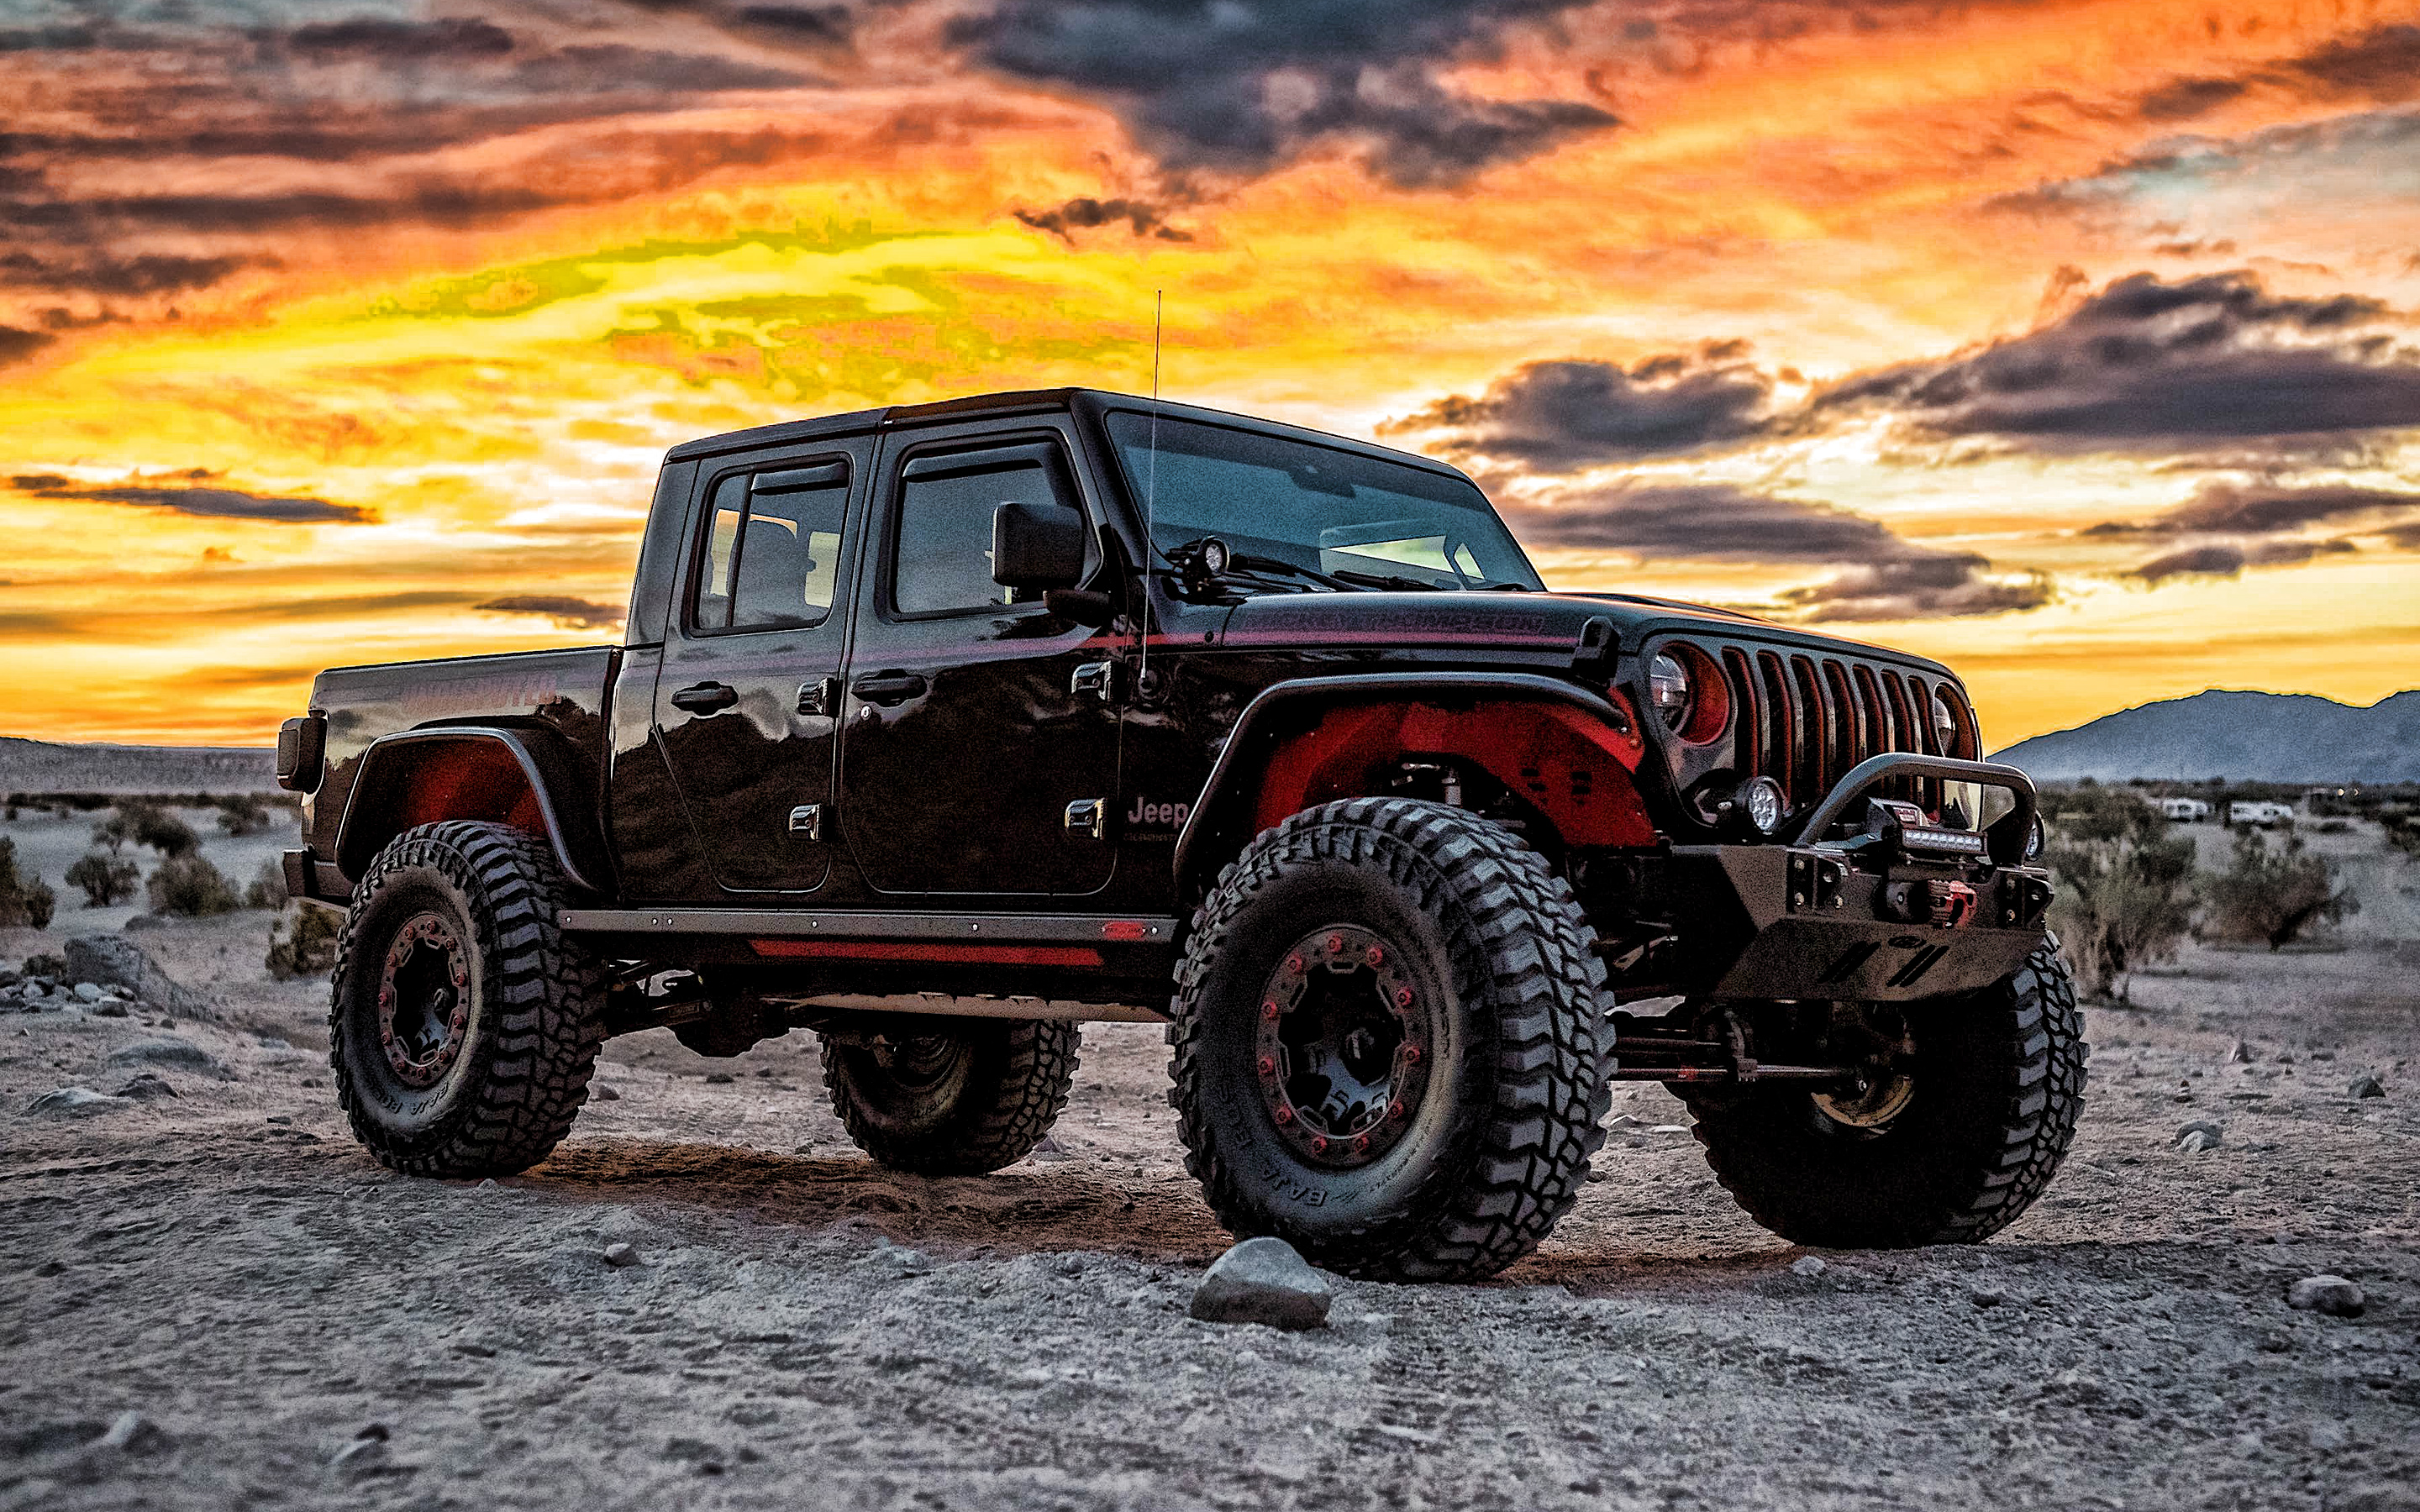 2020 Jeep Gladiator Rubicon EU  Wallpapers and HD Images  Car Pixel